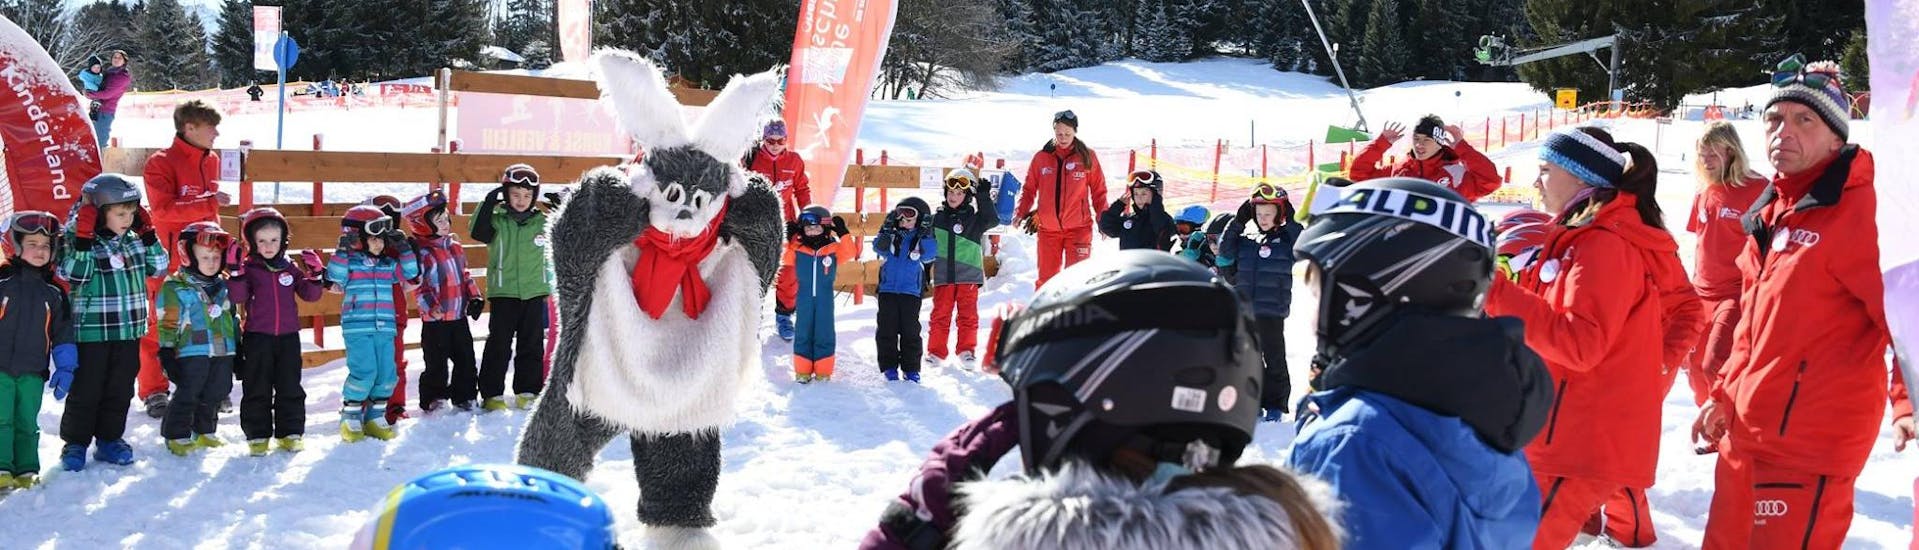 Children are having fun with bunny Hasi during the Private Ski Lessons for Kids - All Levels in the ski school Neue Skischule Oberstdorf.